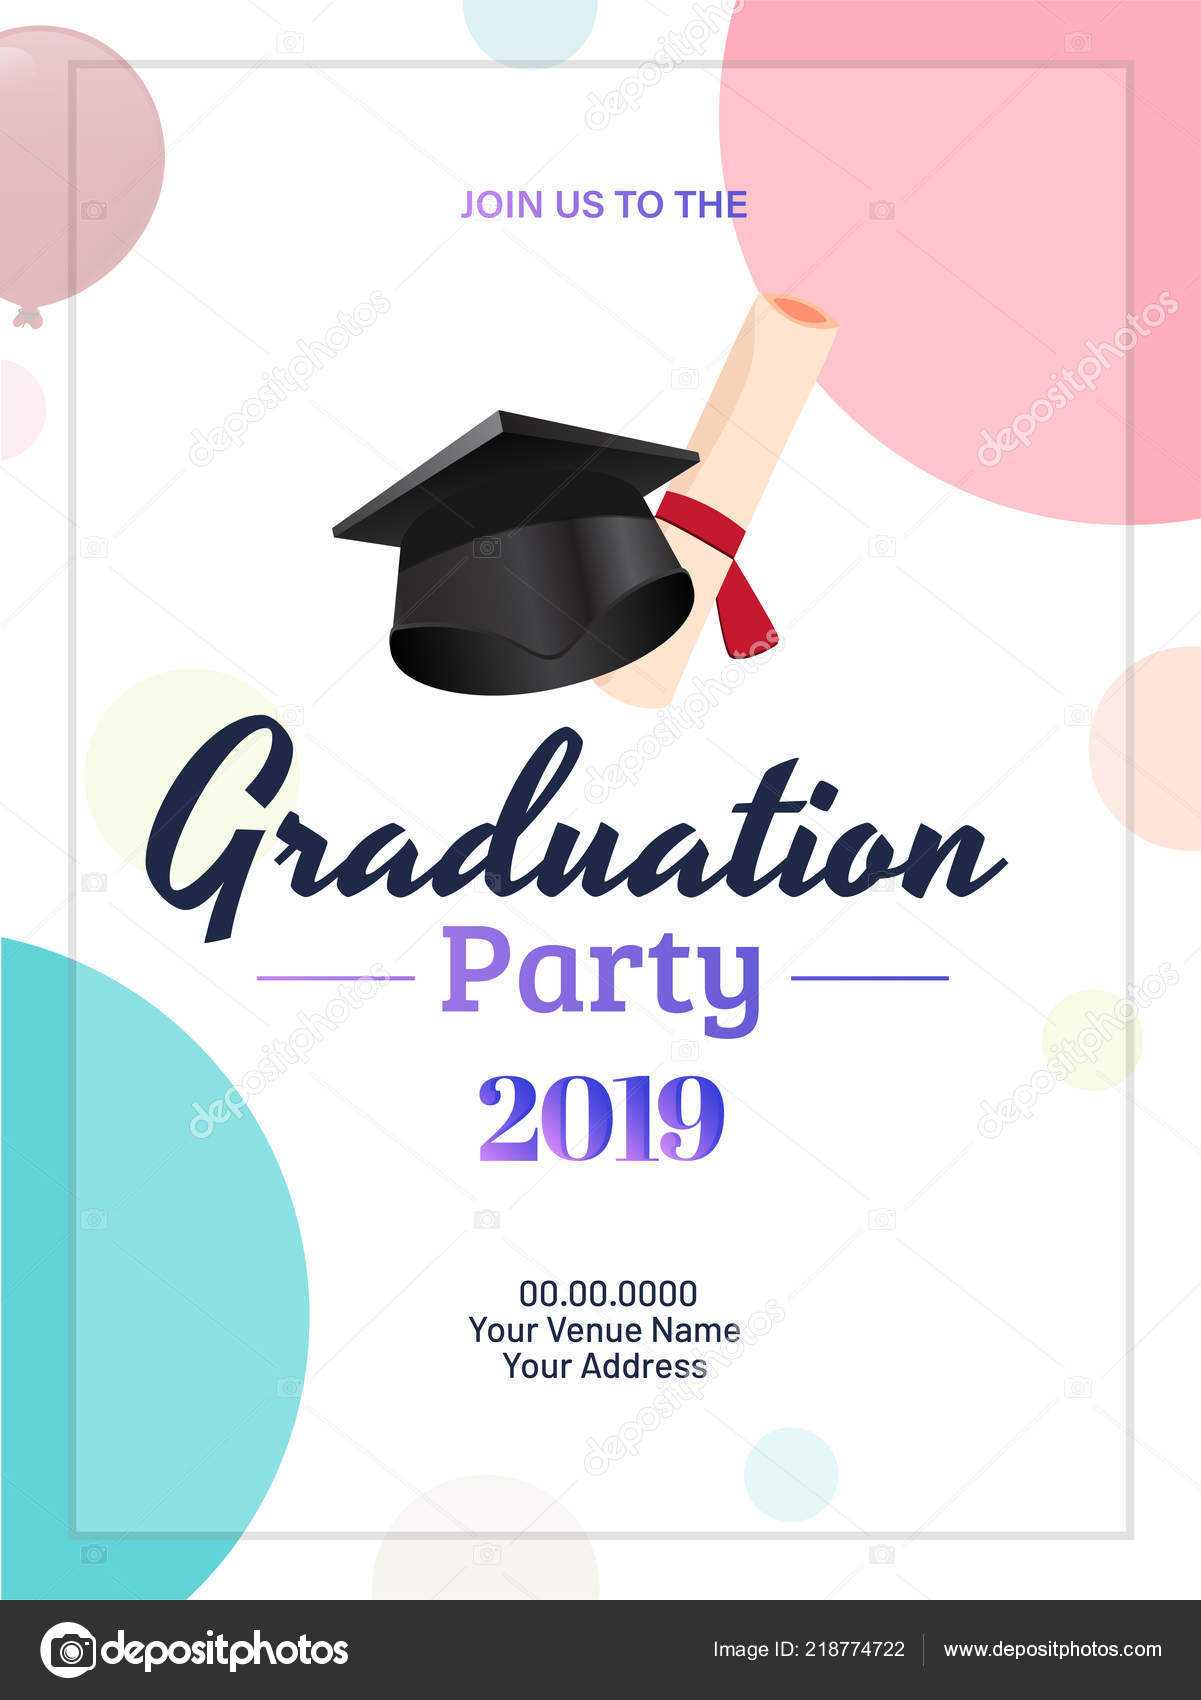 Images: College Graduation Party Invitations Templates For Graduation Party Invitation Templates Free Word